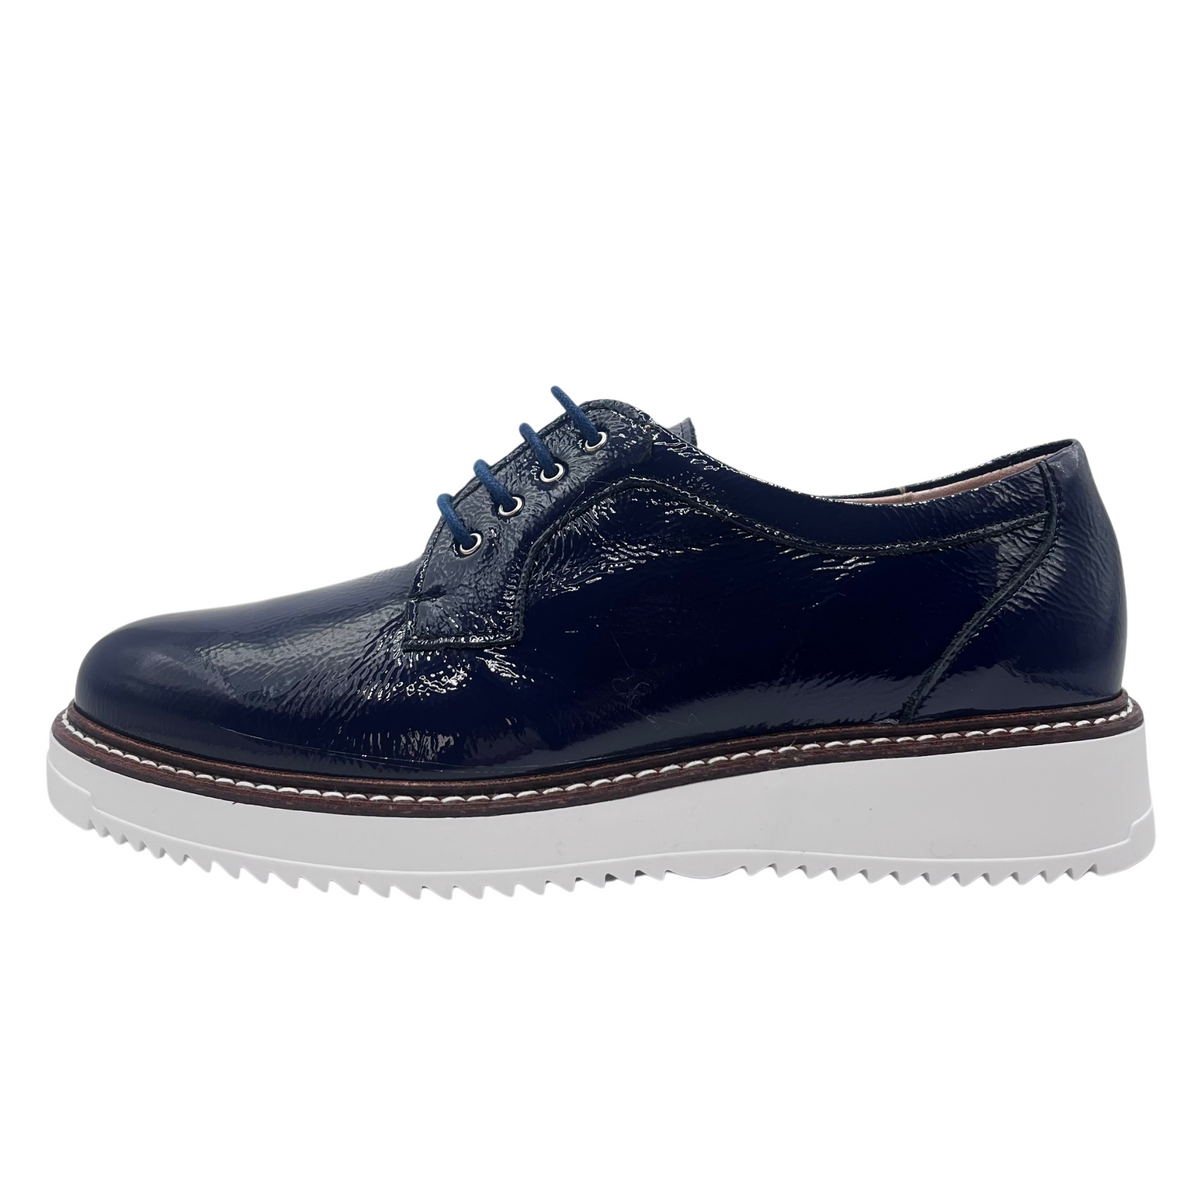 Pitillos Navy Leather Patent Brogues